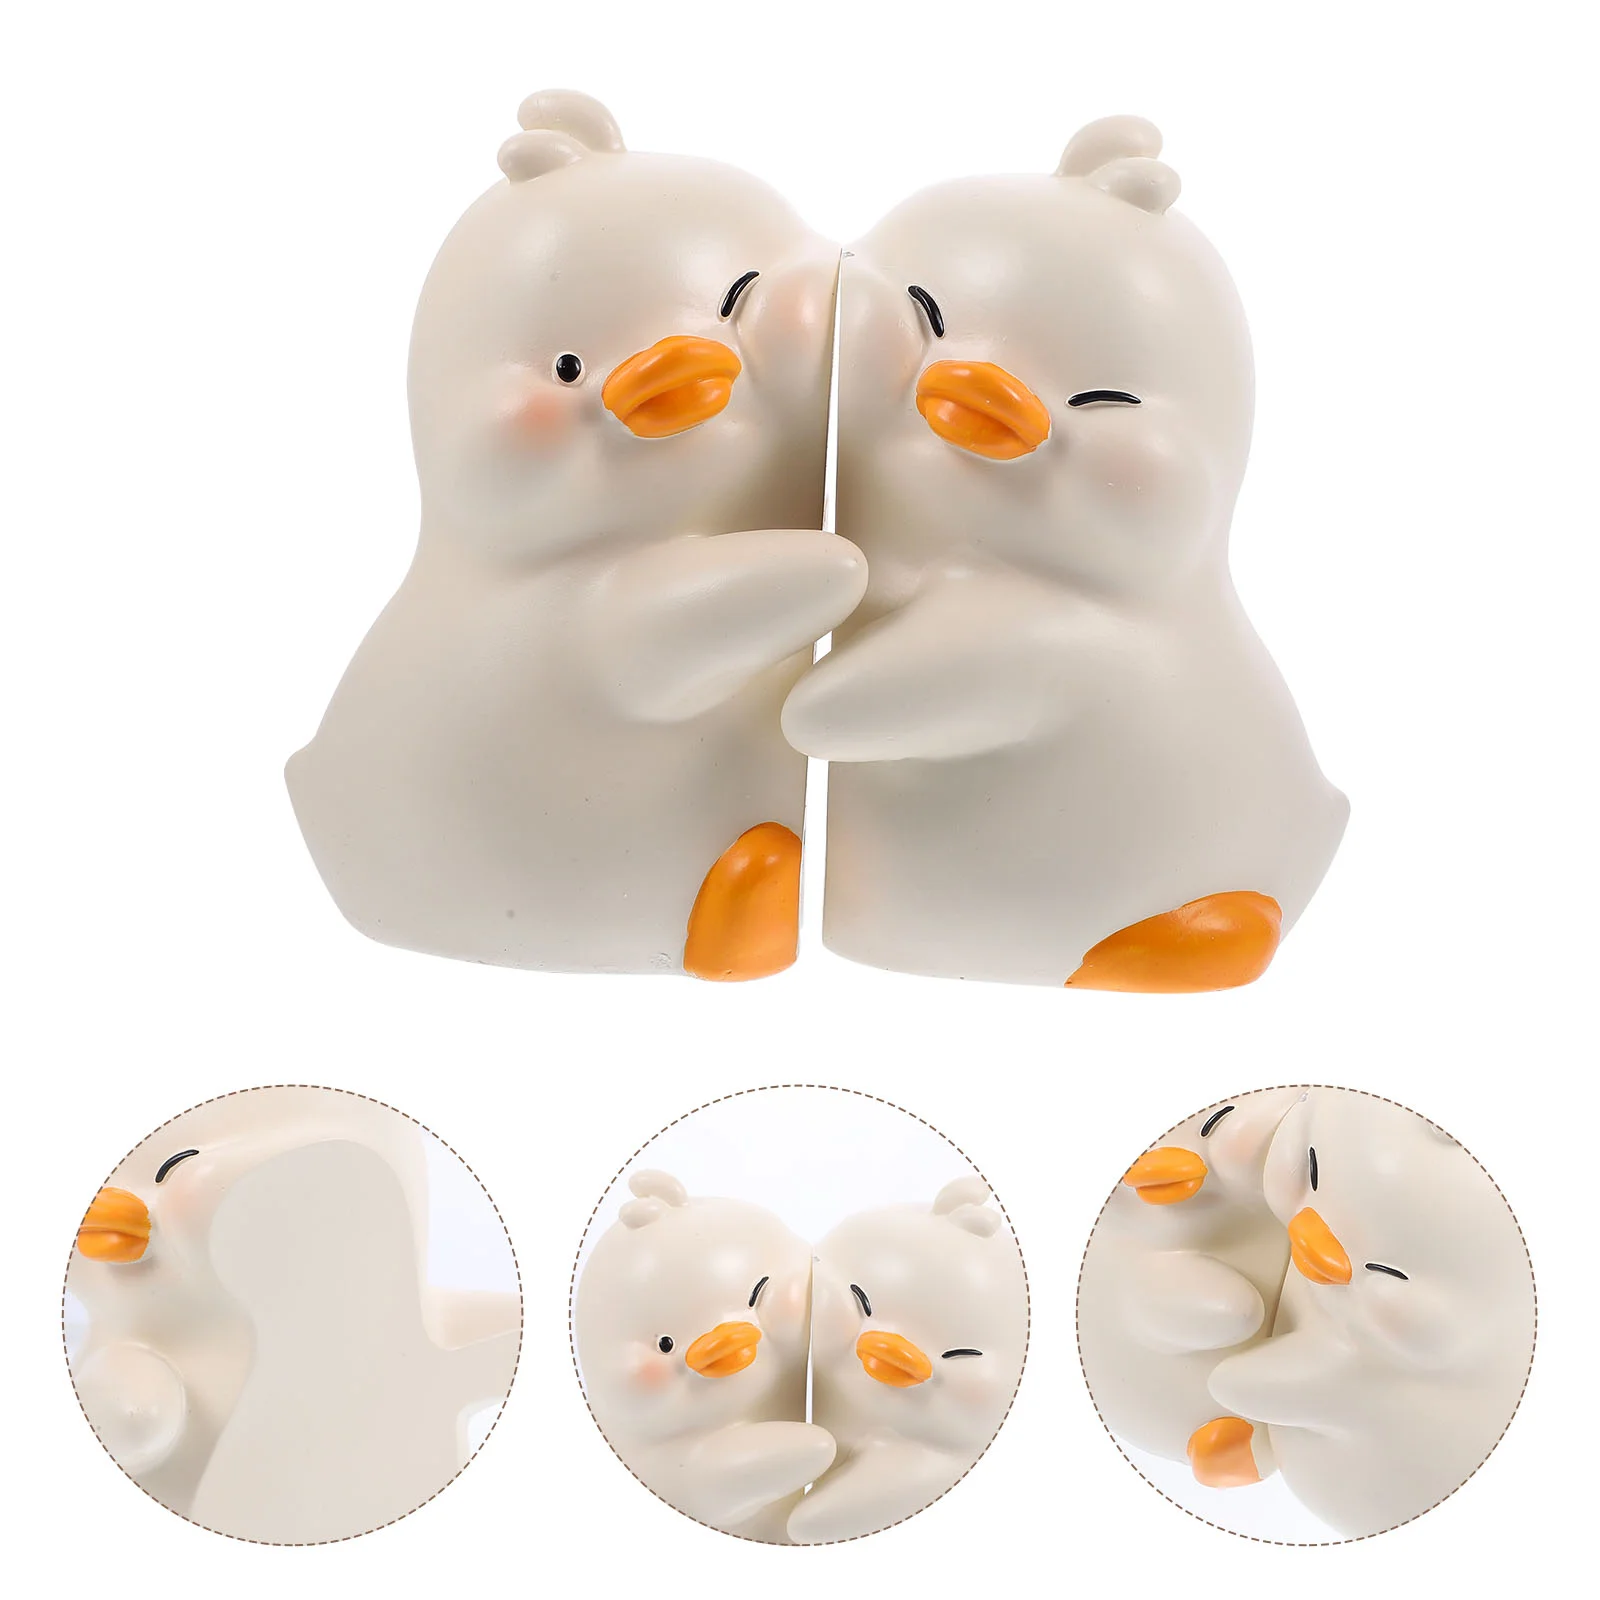 1 Pair Cute Hug Ducks Decorative Bookend Resin Book Holder Stopper for Home Office Desk 1 pair bookend stainless steel book end stand home school stopper library